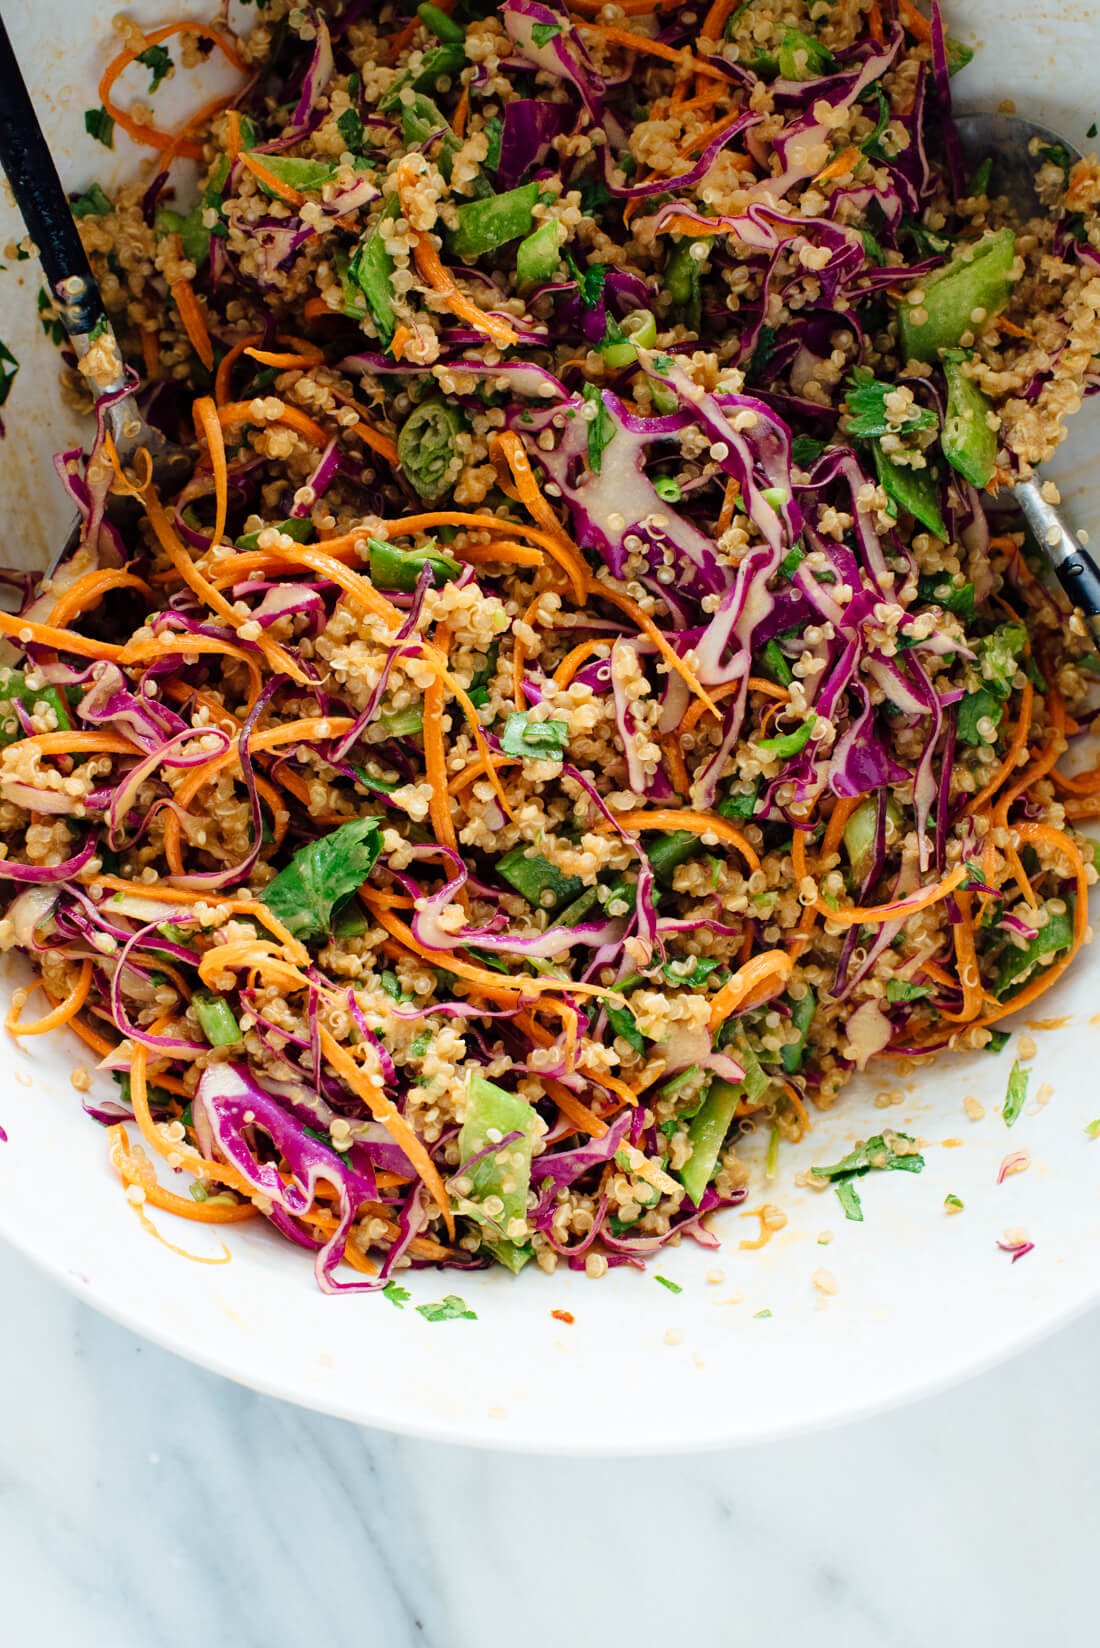 This Thai-flavored quinoa salad recipe is colorful, crisp and delicious! It's also vegan and gluten free. cookieandkate.com